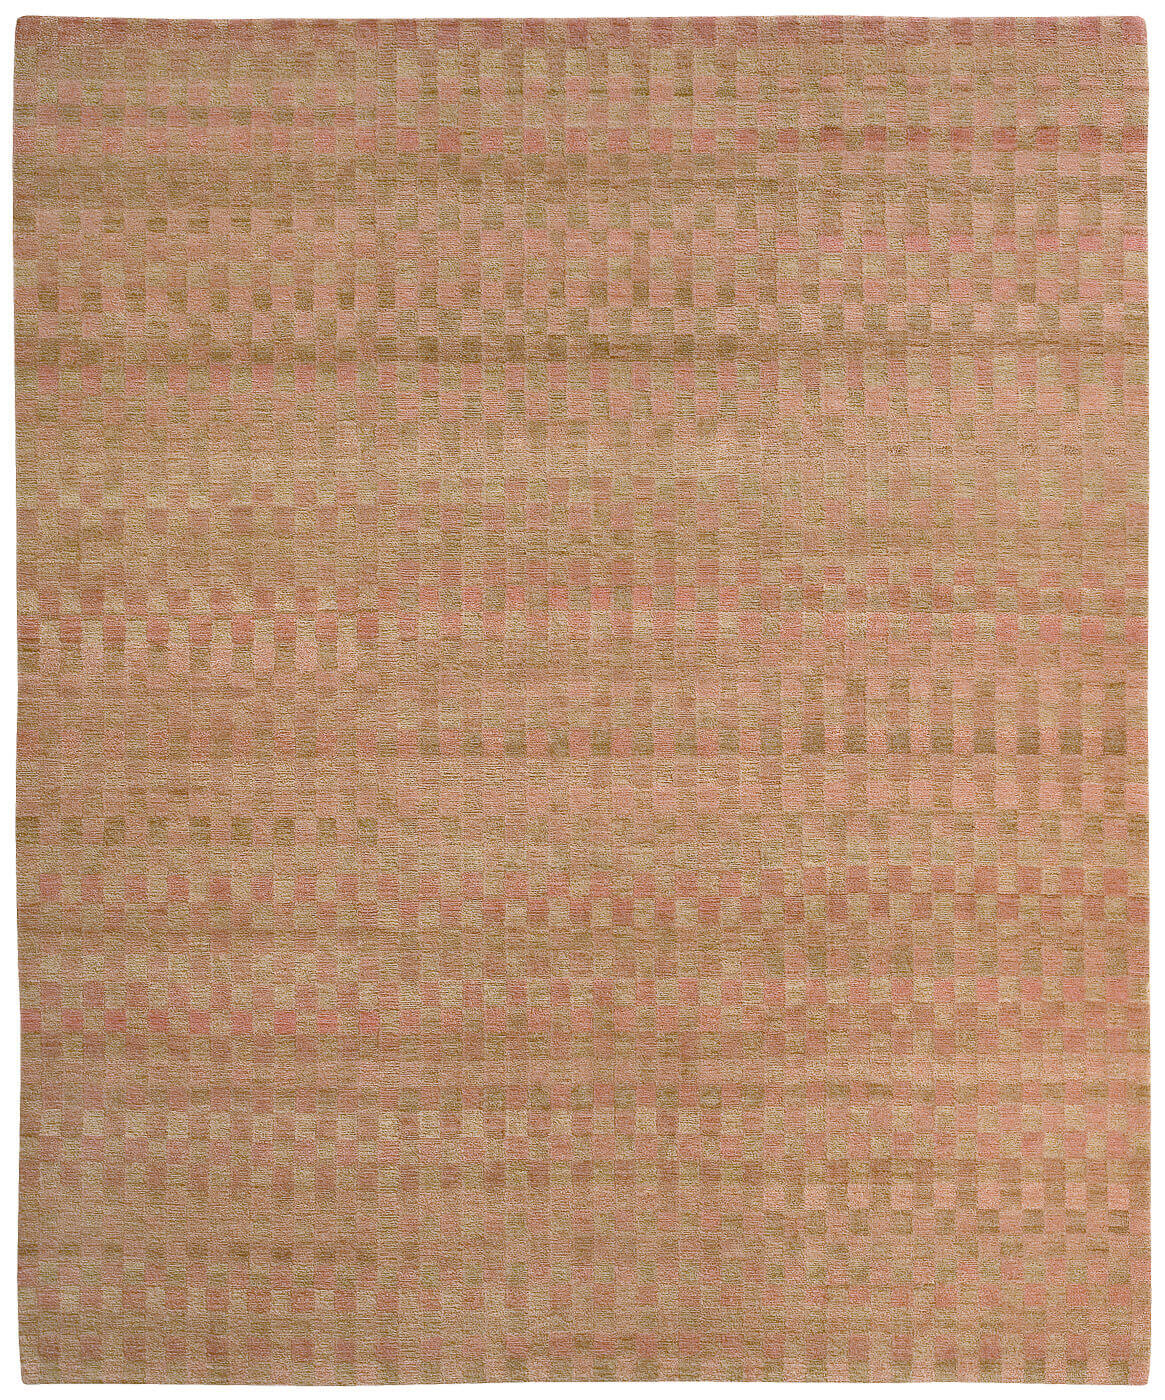 Hand-woven Checkered Luxury Rug ☞ Size: 250 x 300 cm